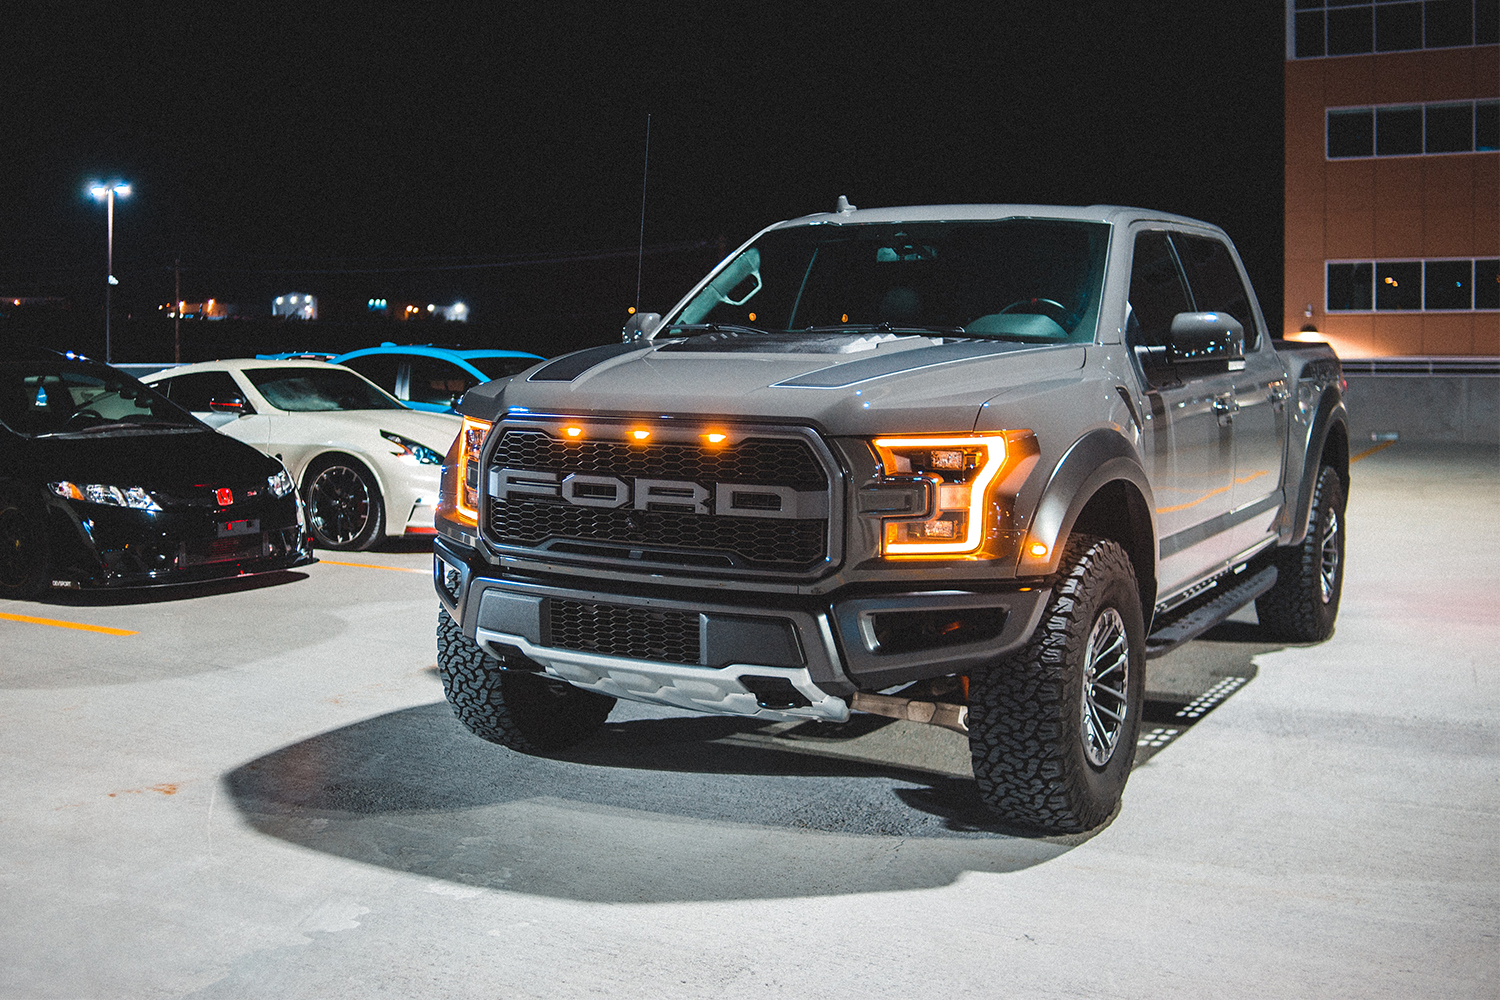 A giant Ford pickup truck sitting next to a line of cars